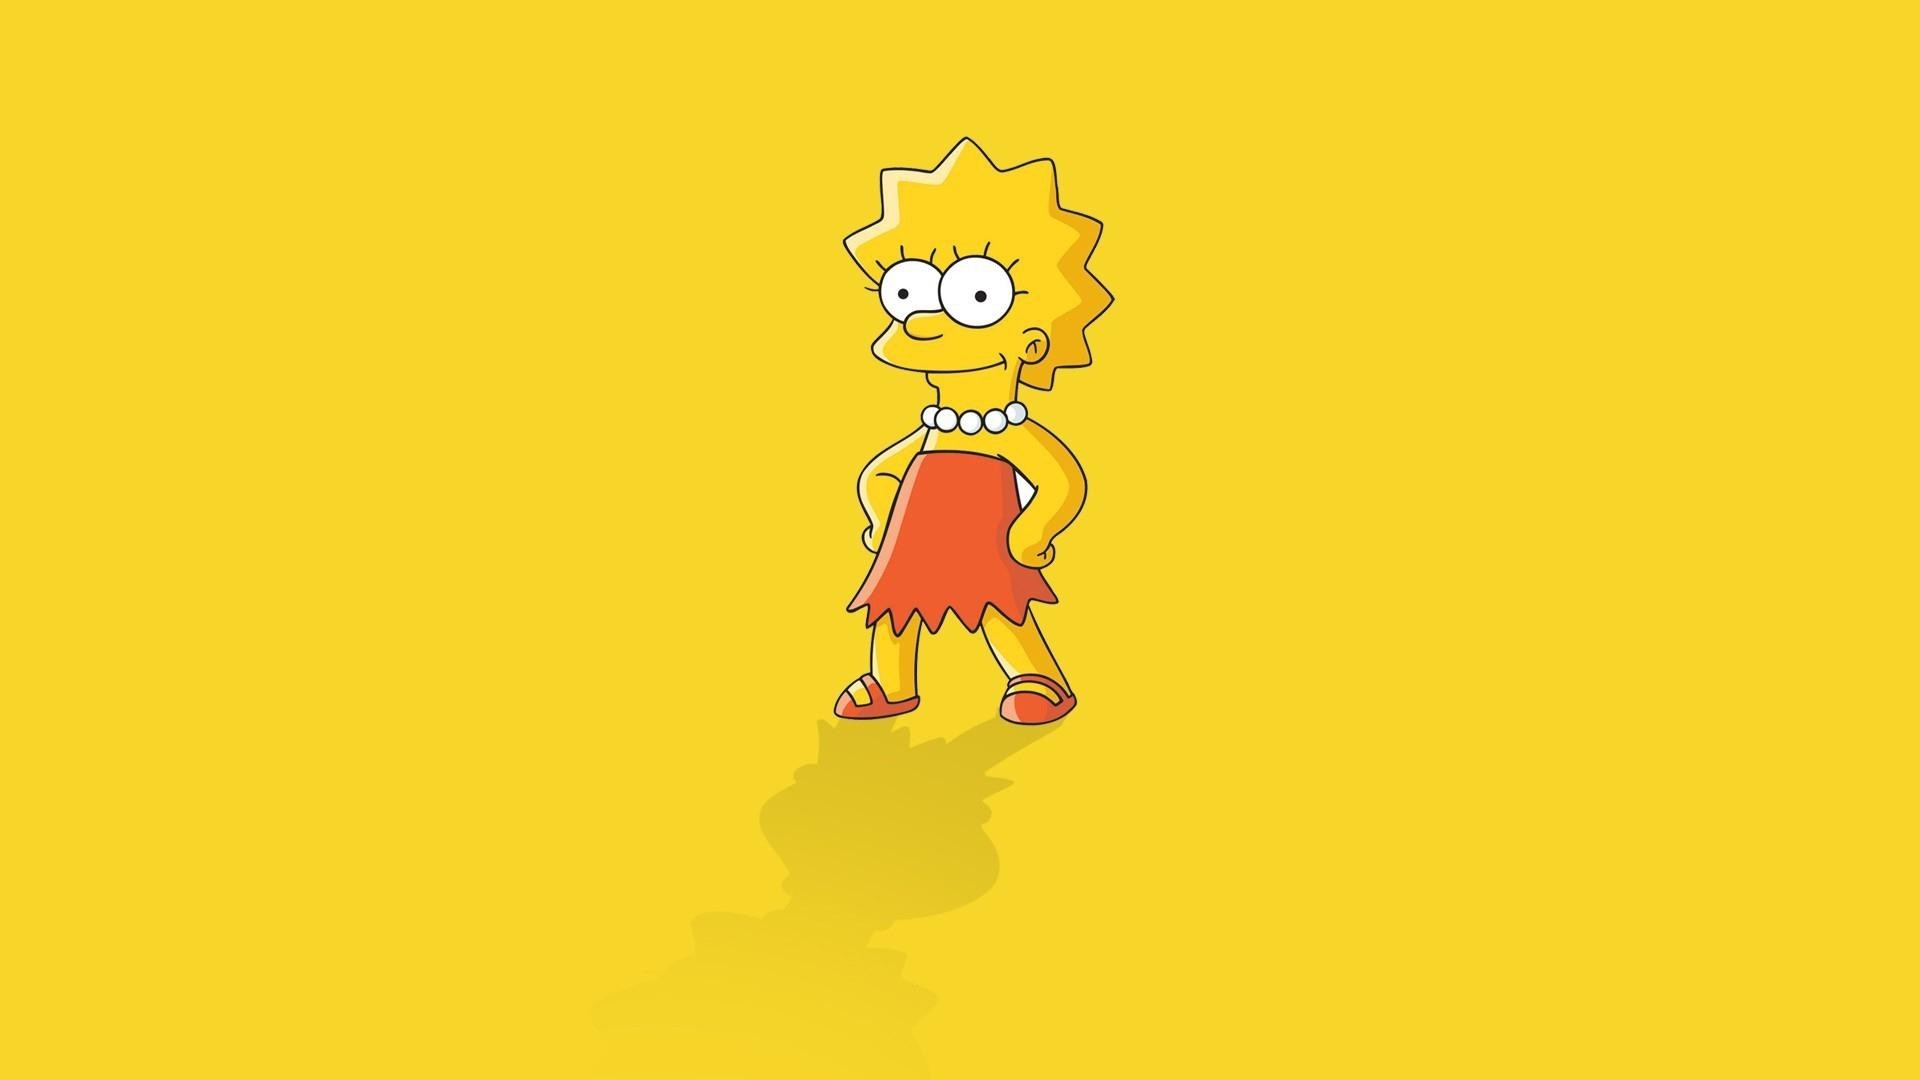 1920x1080 The Simpsons Specs and the City wallpaper S25E11 | Simpsons | Pinterest